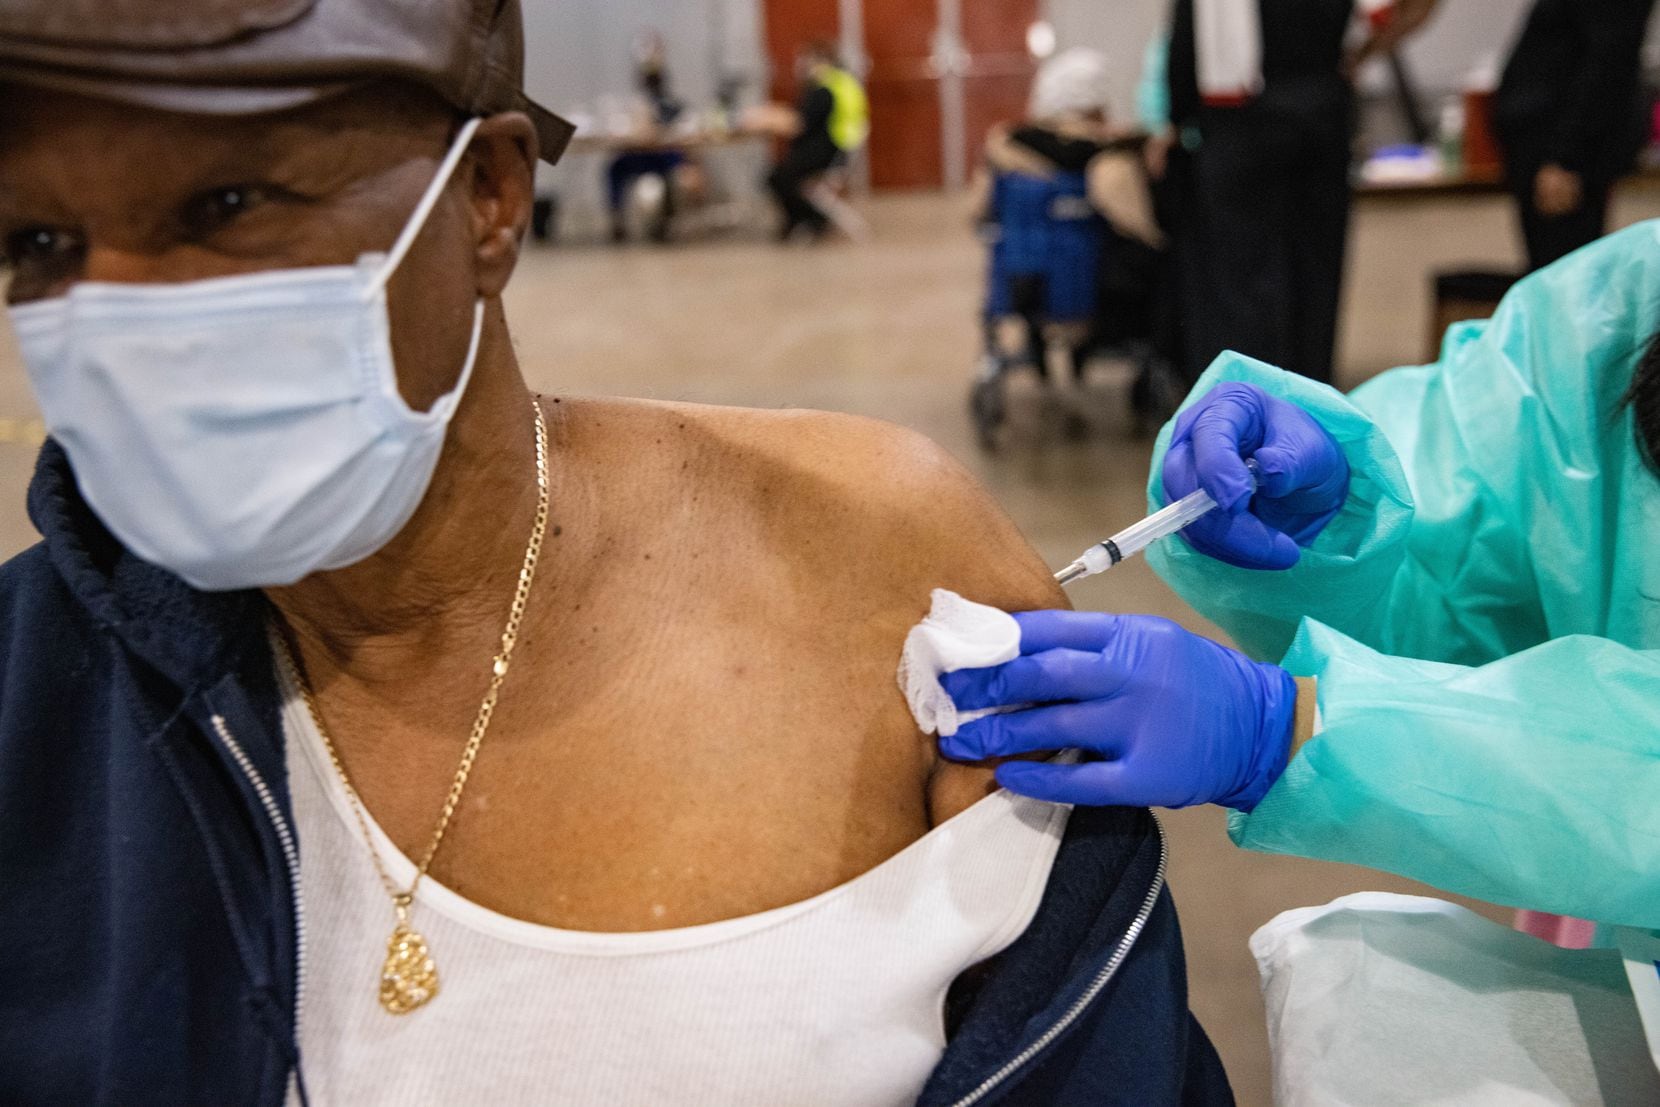 Verely Cooper, 81, of DeSoto looks away as he receives the COVID-19 vaccine at Fair Park in Dallas on Thursday, January 14, 2021. A limited number of COVID-19 vaccines will be available Thursday at Fair Park for children. North Texans 75 and over.  (Juan Figueroa / The Dallas Morning News)